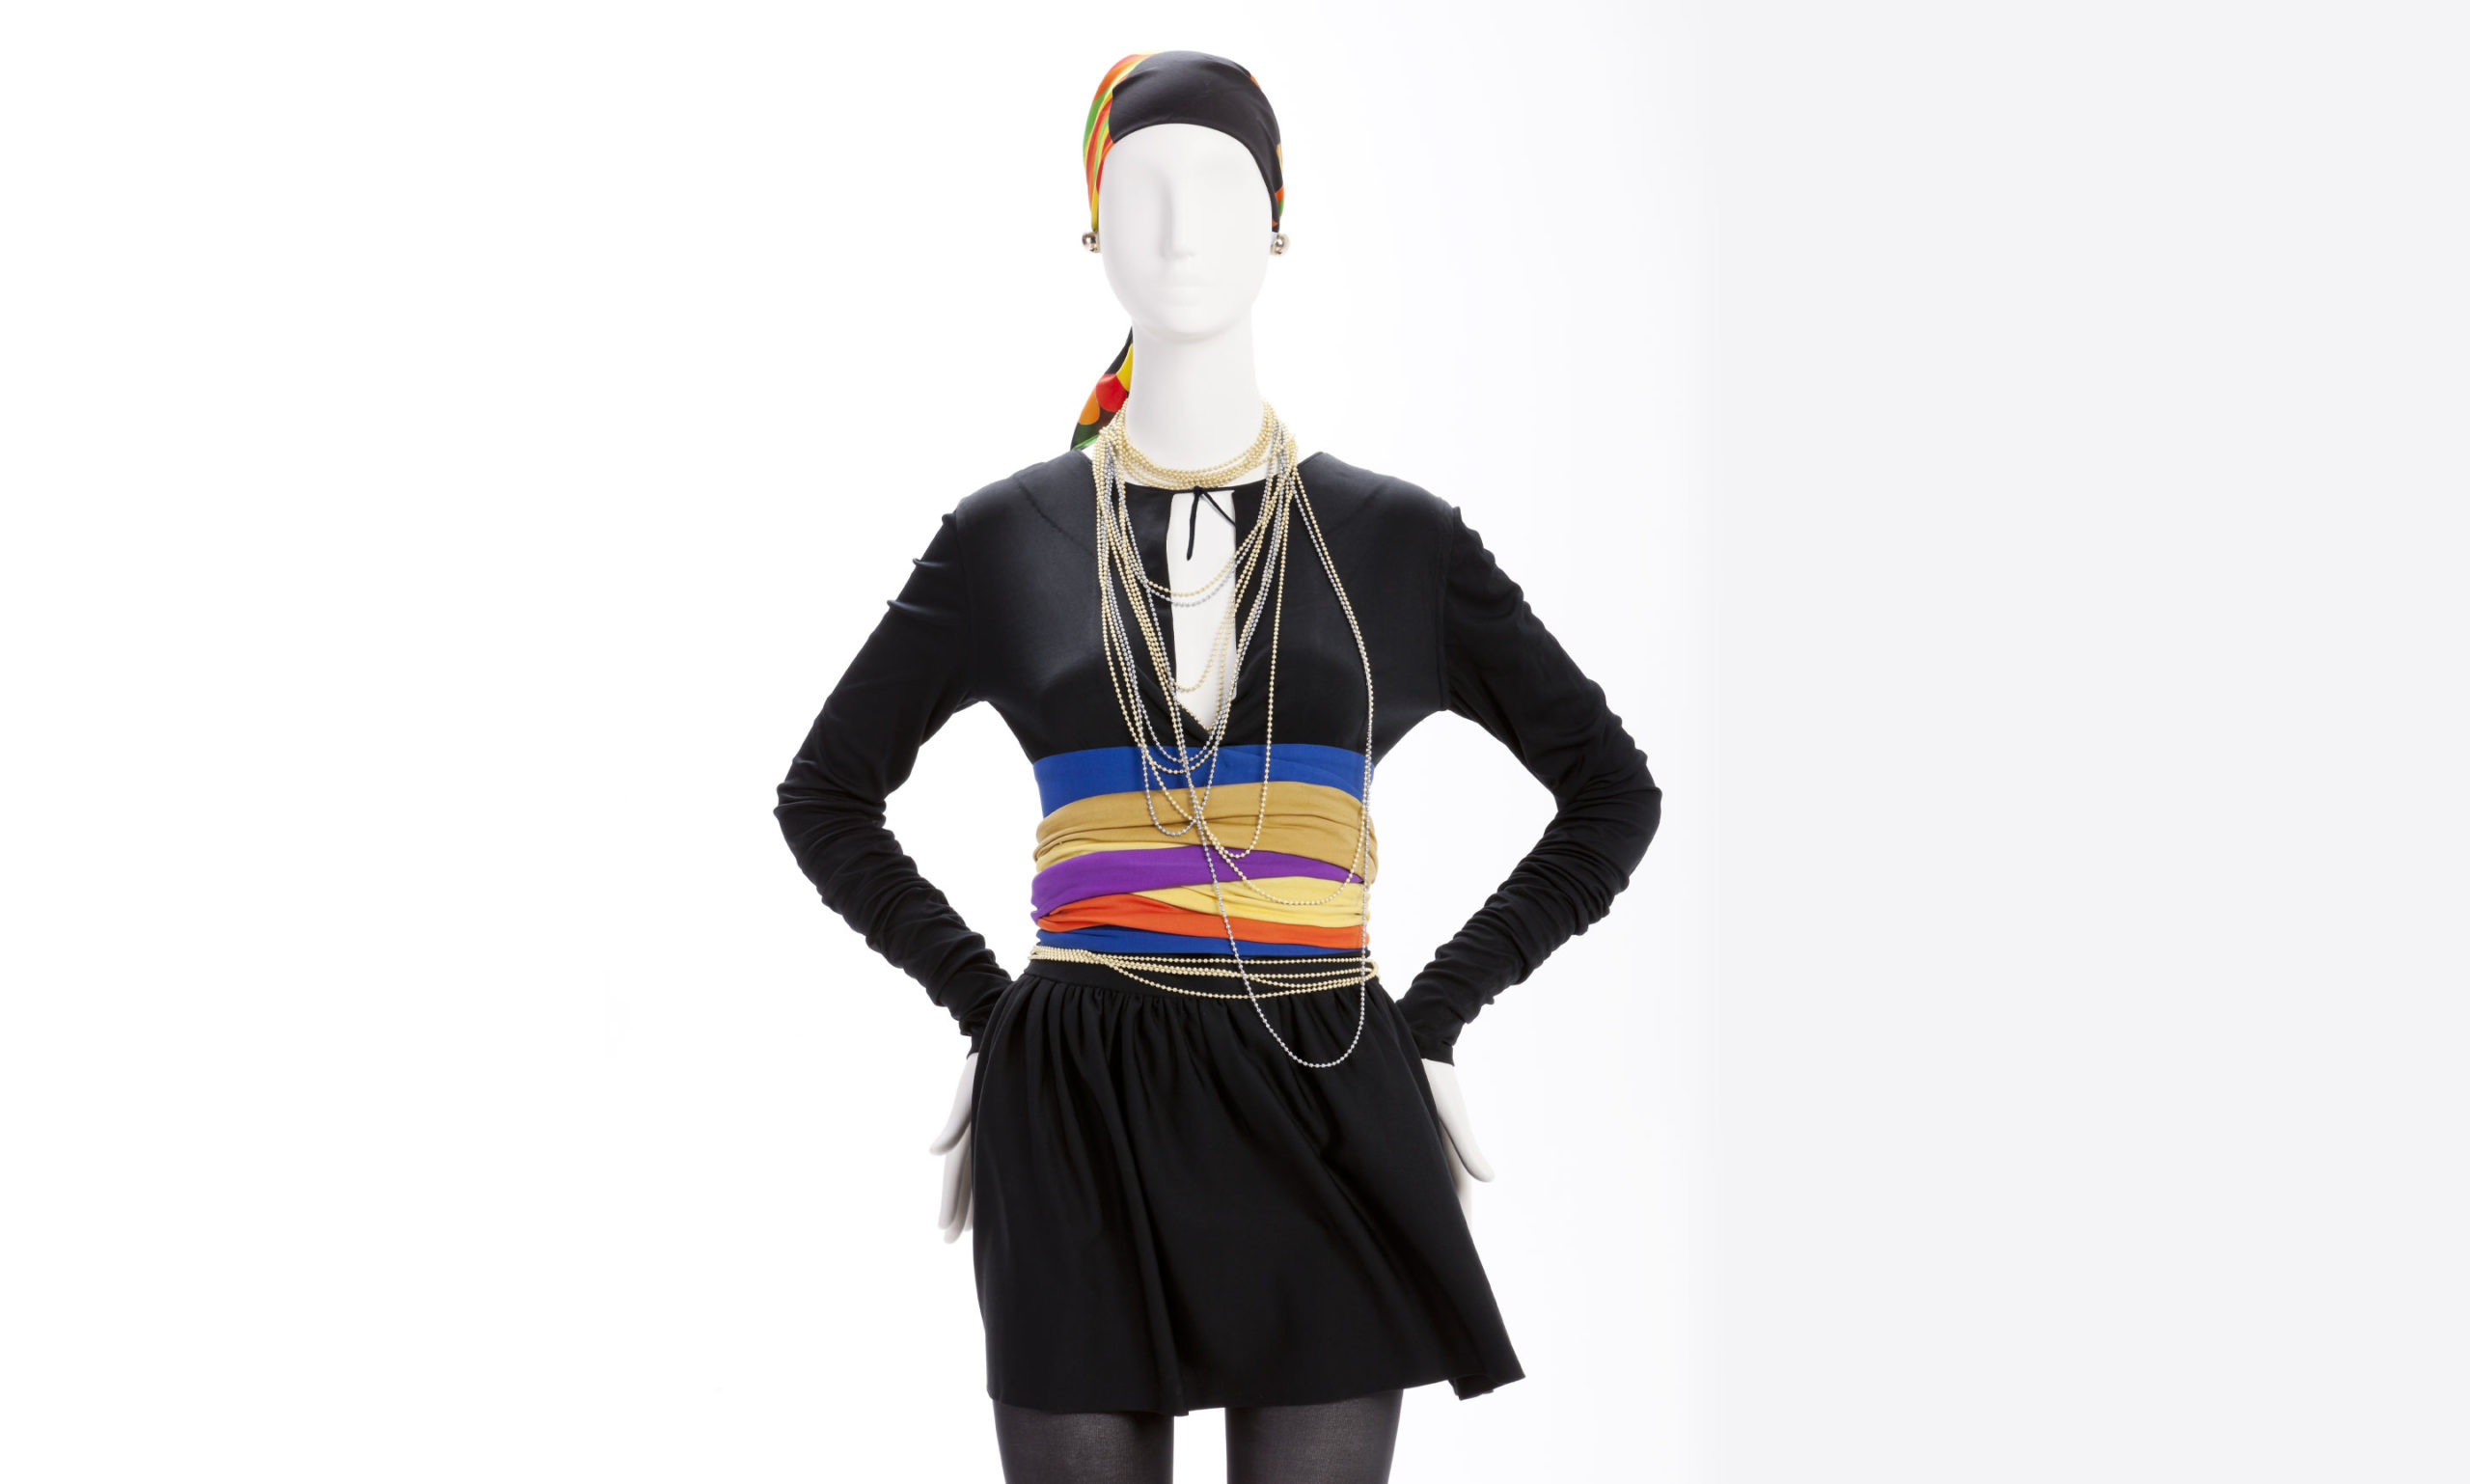 Giorgio di Sant'Angelo, Surplice Black Bodice with Multi-colored Ties, Longsleeves, Wide Panel of Blue at Waist, 1968. Lycra. Gift of The Metropolitan Museum of Art.